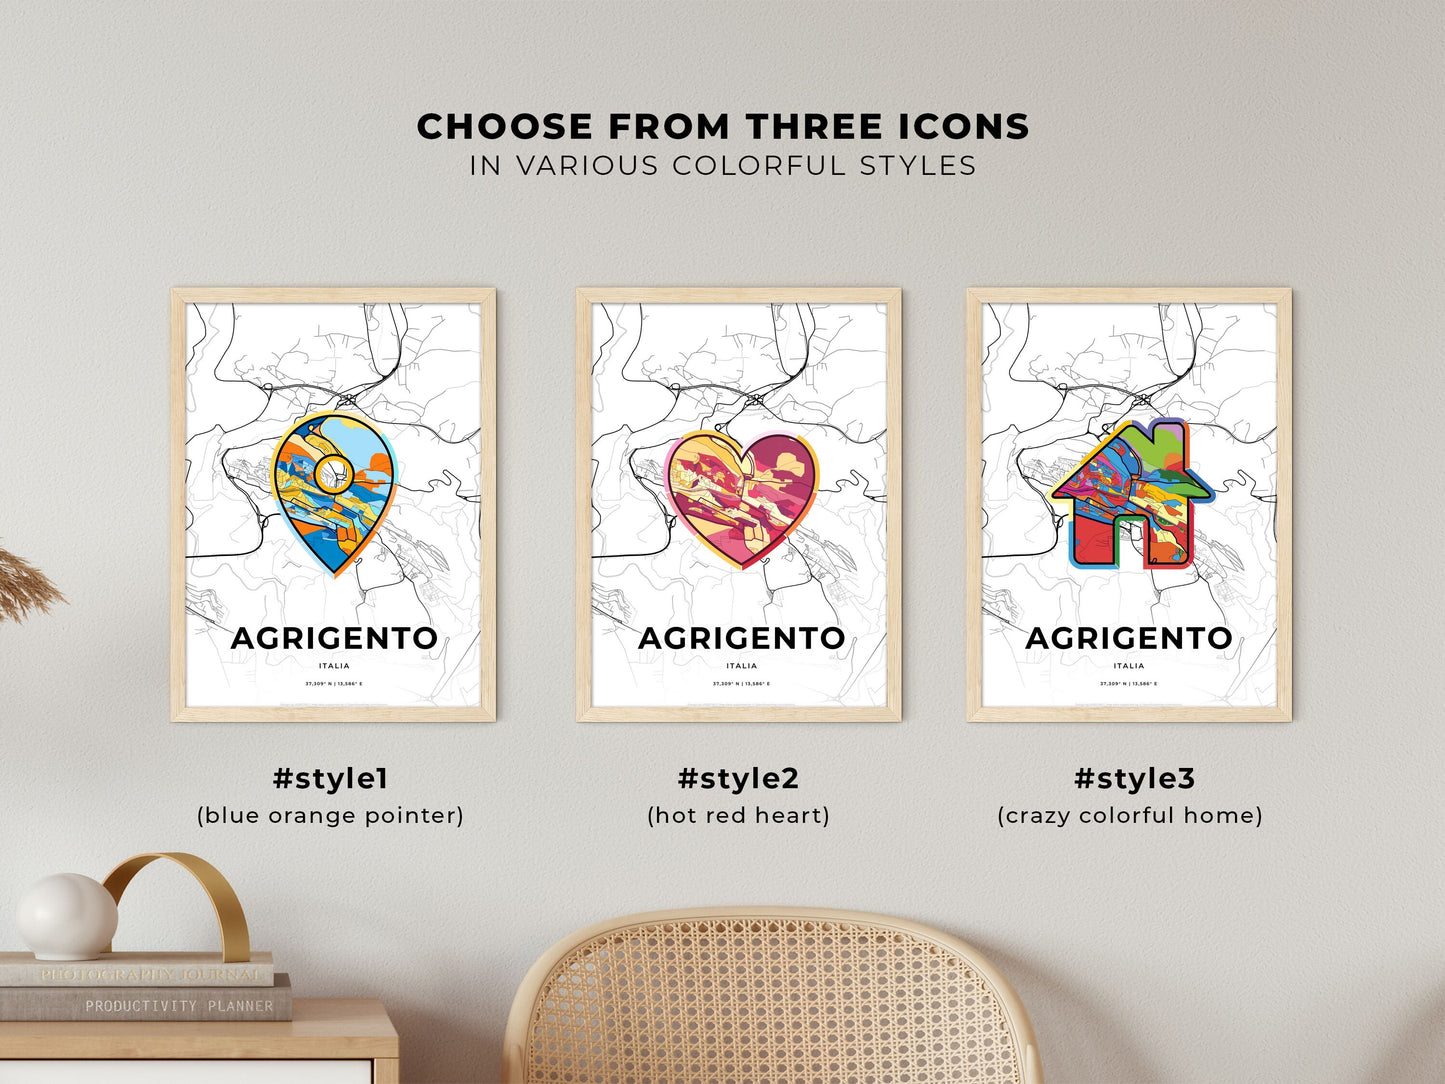 AGRIGENTO ITALY minimal art map with a colorful icon. Where it all began, Couple map gift.